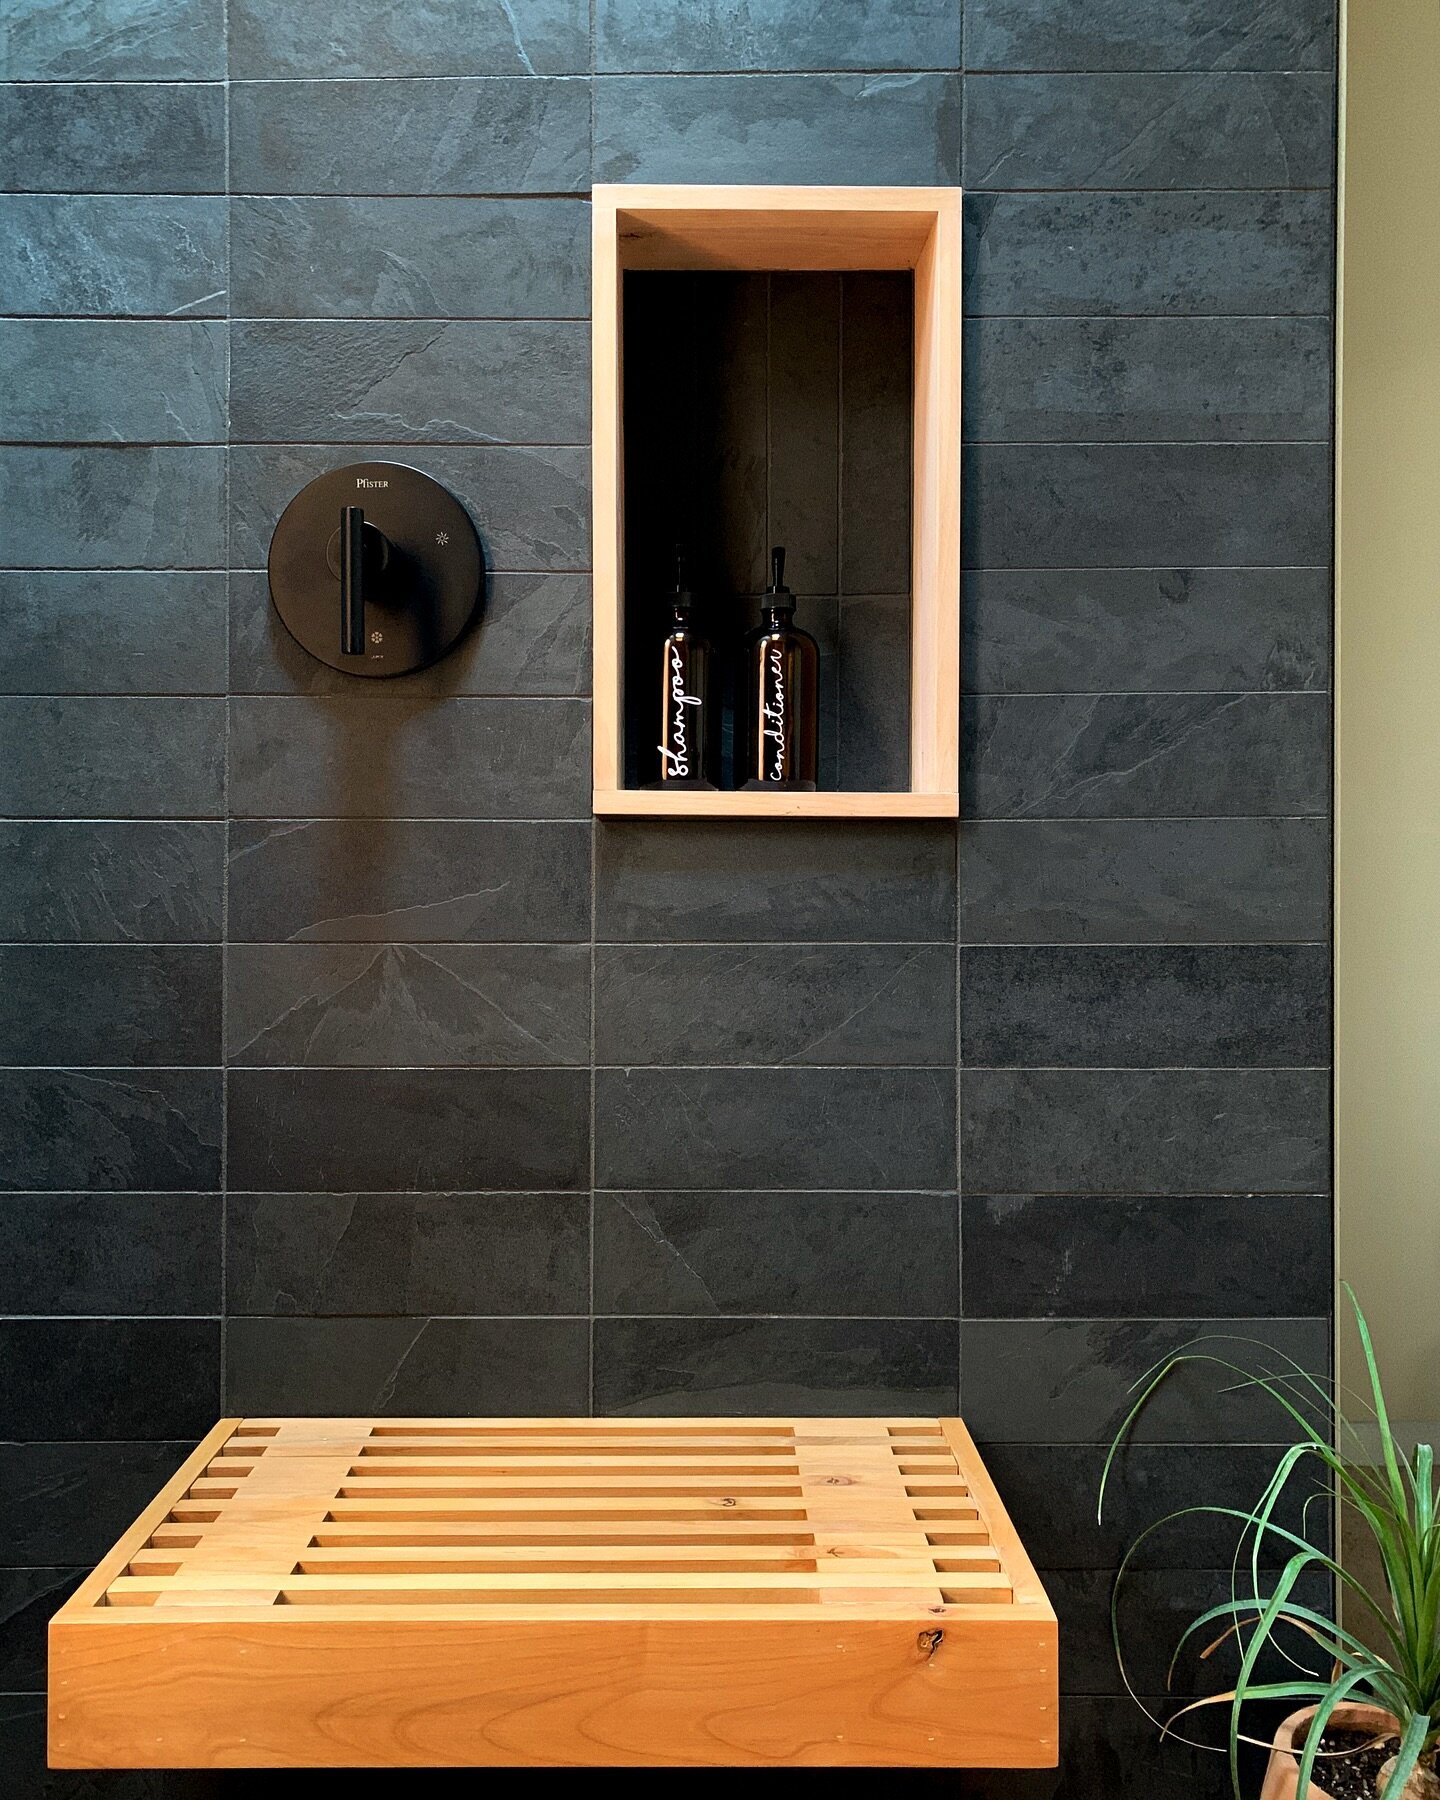 custom floating alder wood shower bench with matching trim for the soap niche. paired with slate 4x12 tile, this bathroom has a nice warmth &amp; earthiness ✨
#studio_collab #interiordesignfirm #yellowkitchen #bathroomdesignideas #bathroomdesigninspo